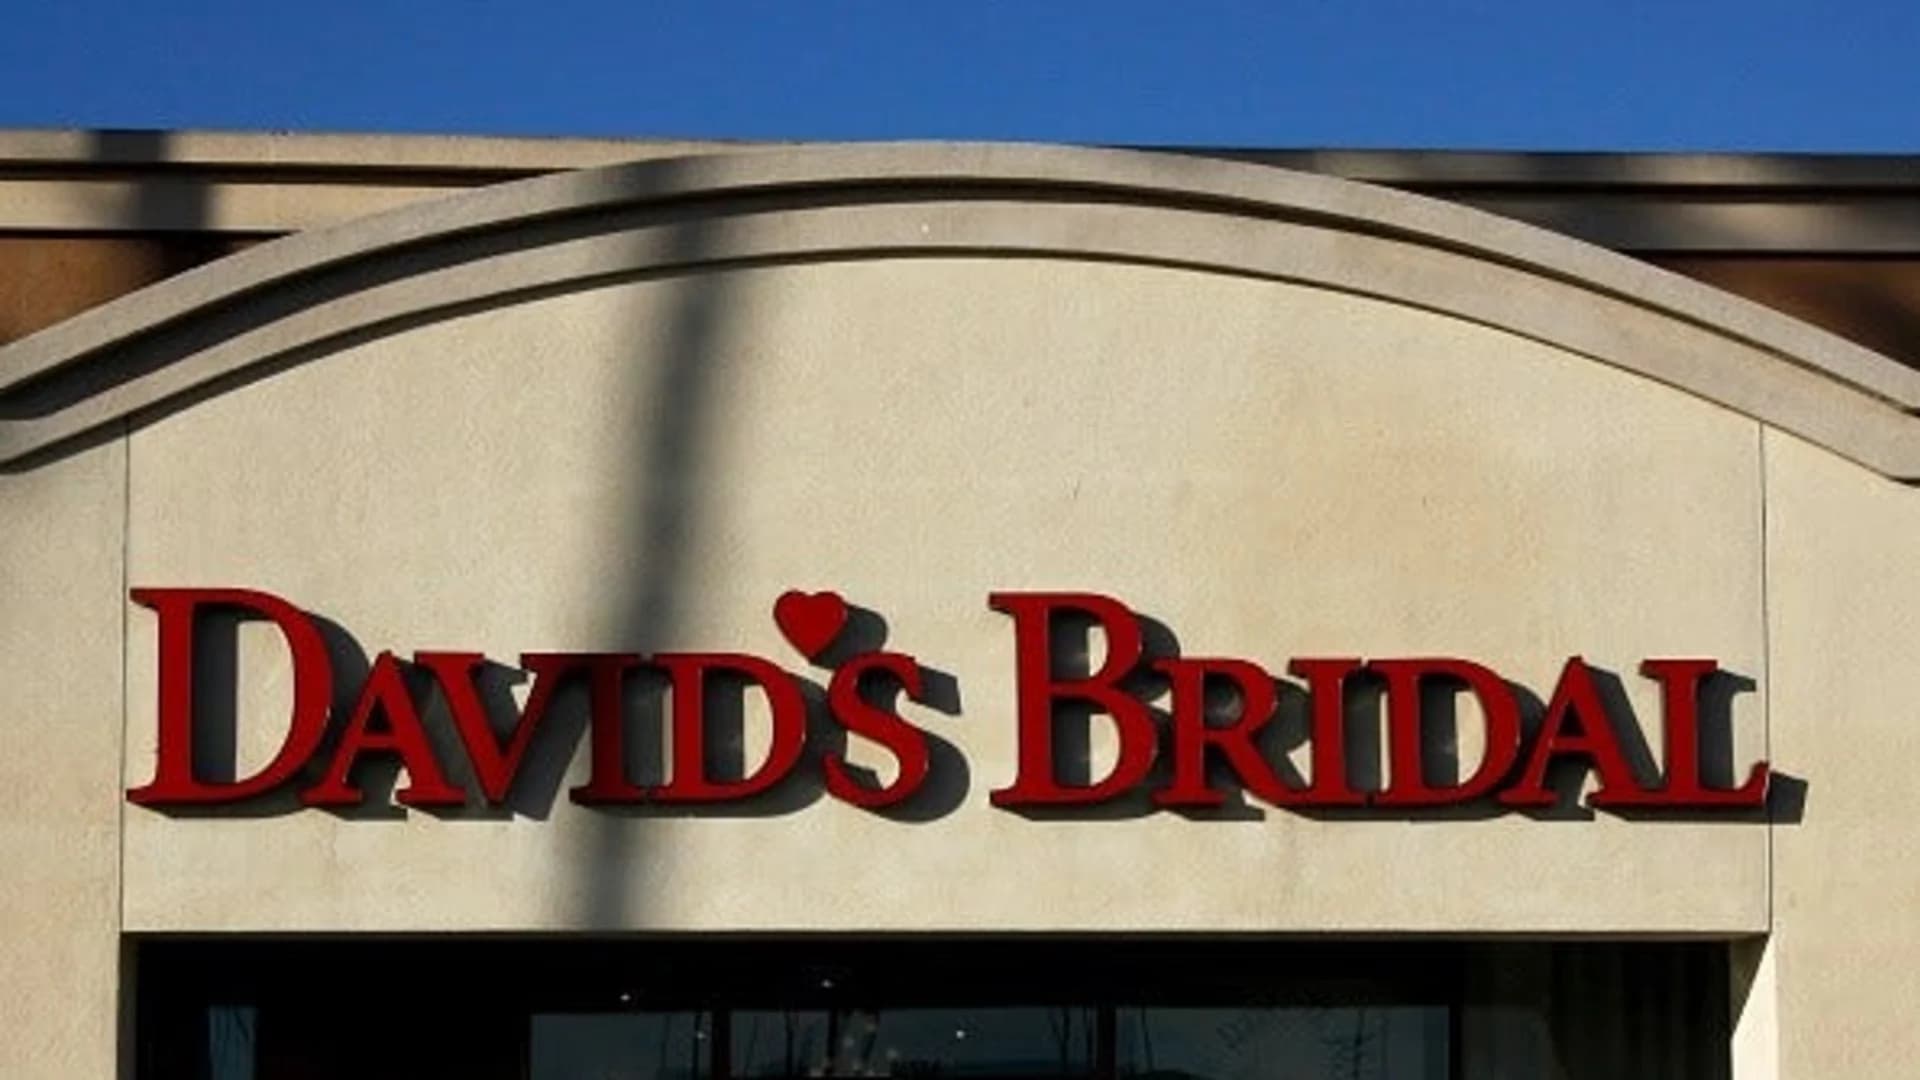 David's Bridal files for bankruptcy to address long-term debt.